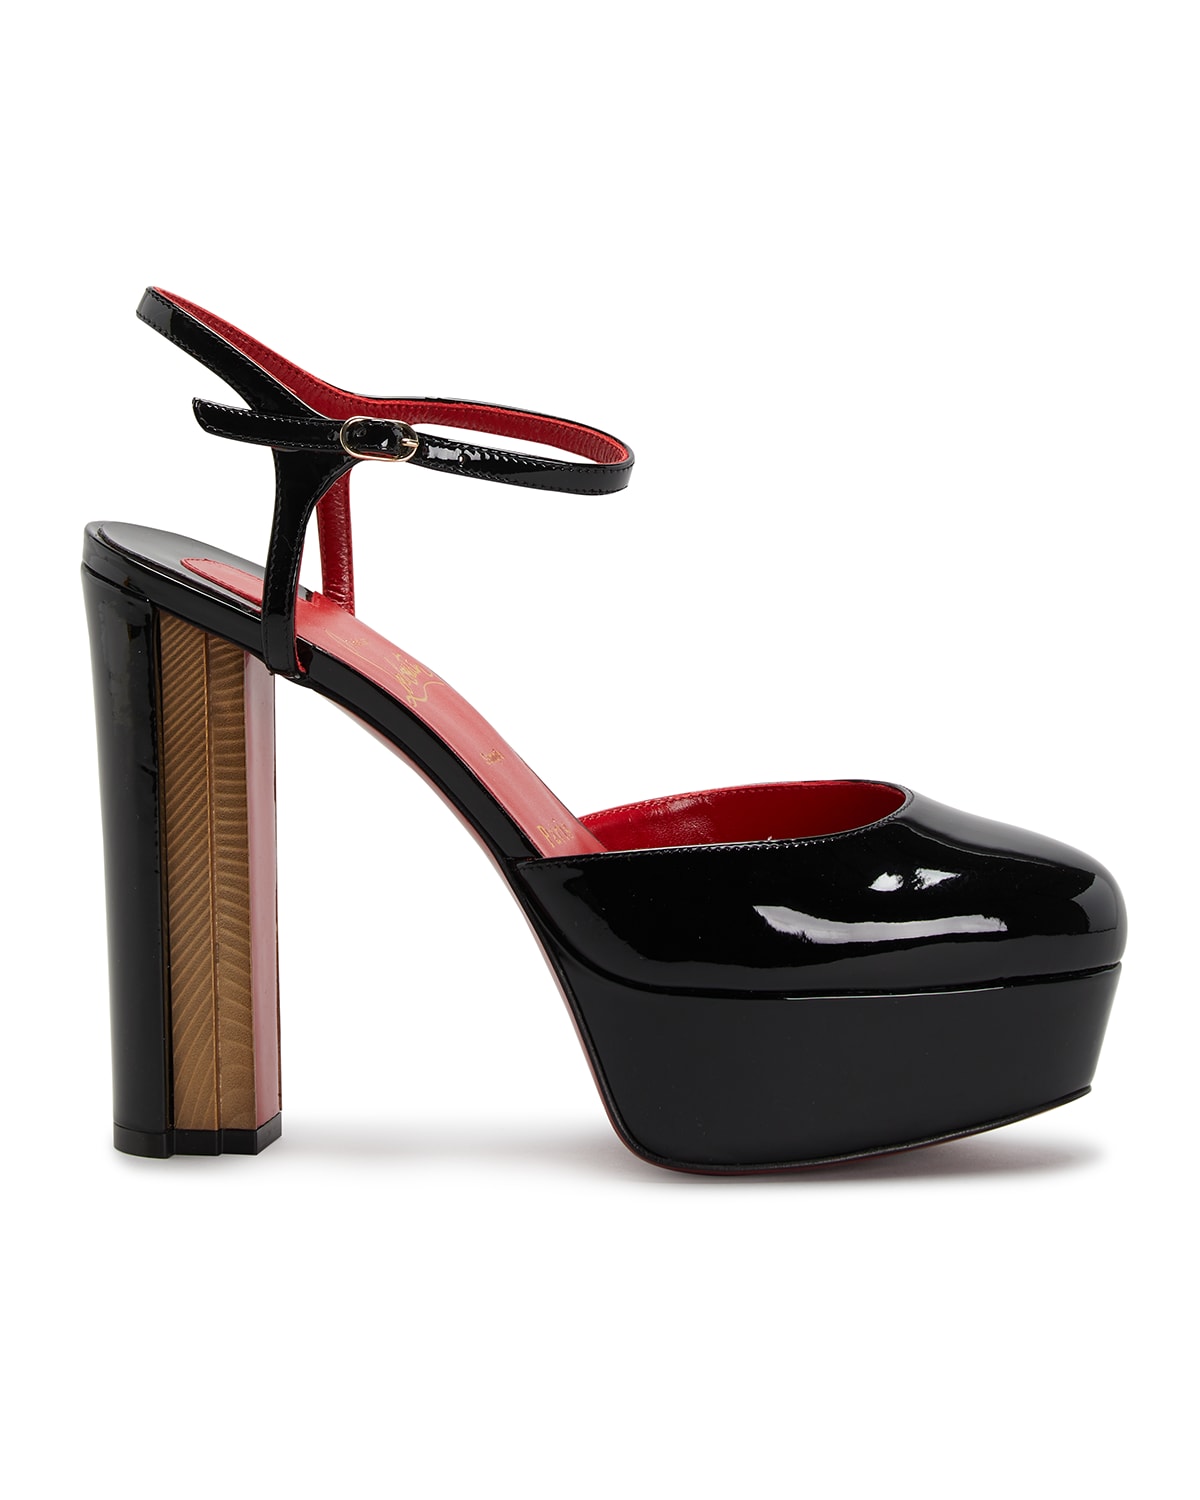 Christian Louboutin Coluna Patent Red Sole Ankle-Strap Pumps